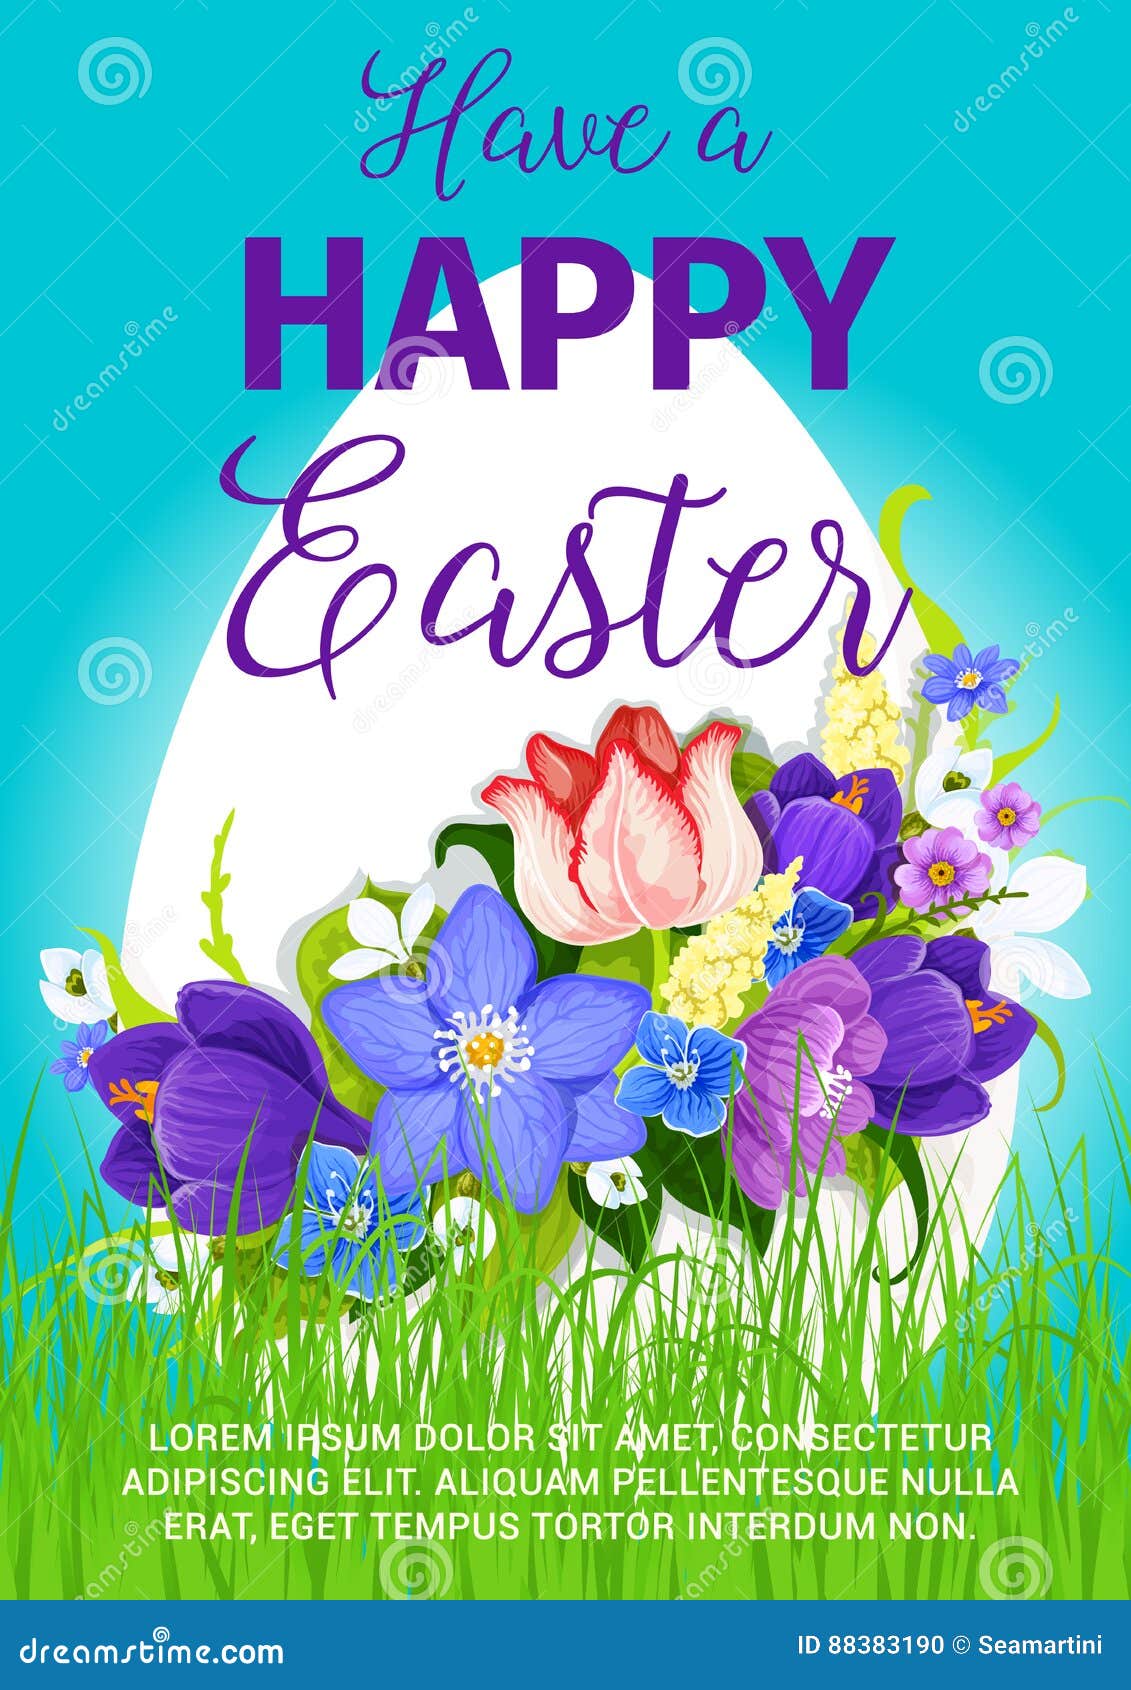 Happy Easter Egg Greeting Poster Vector Design Stock Vector ...